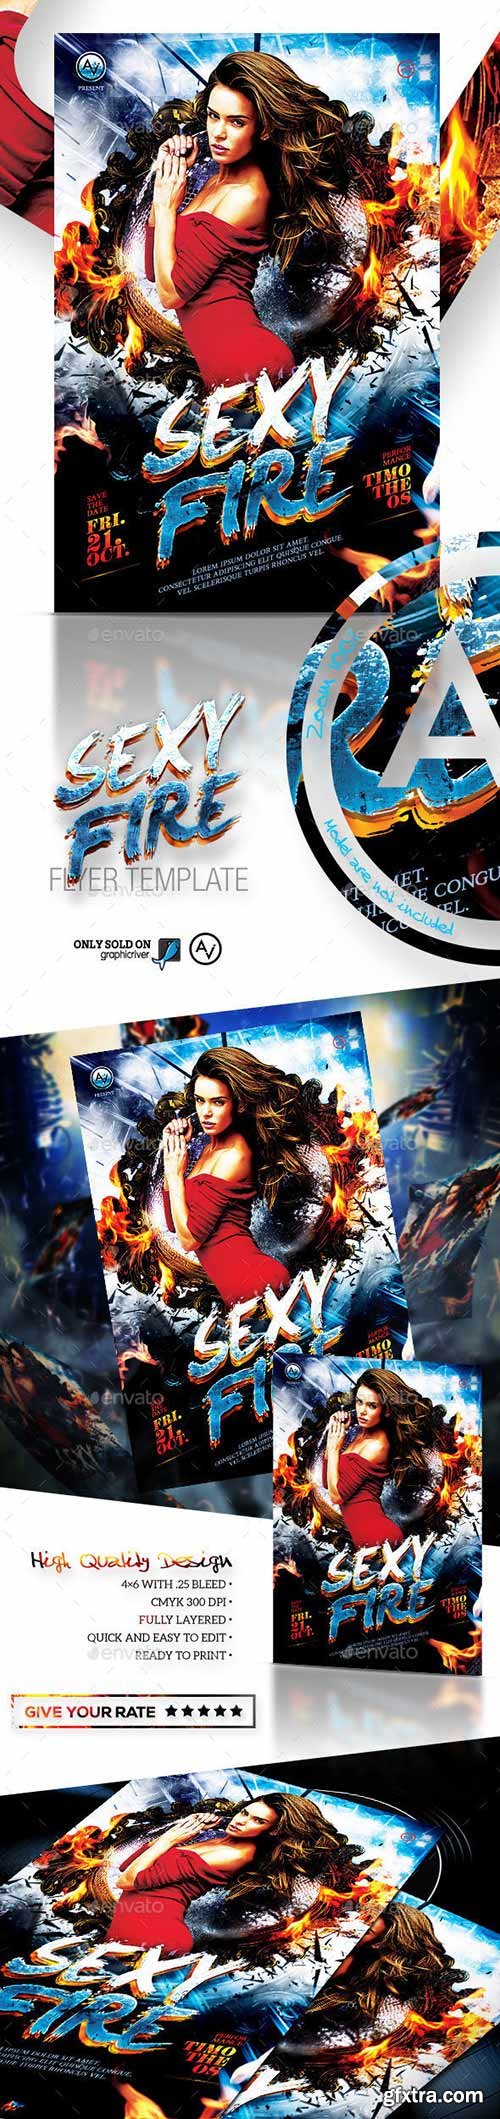 Graphicriver - Sexy Fire Flyer Template 11172636